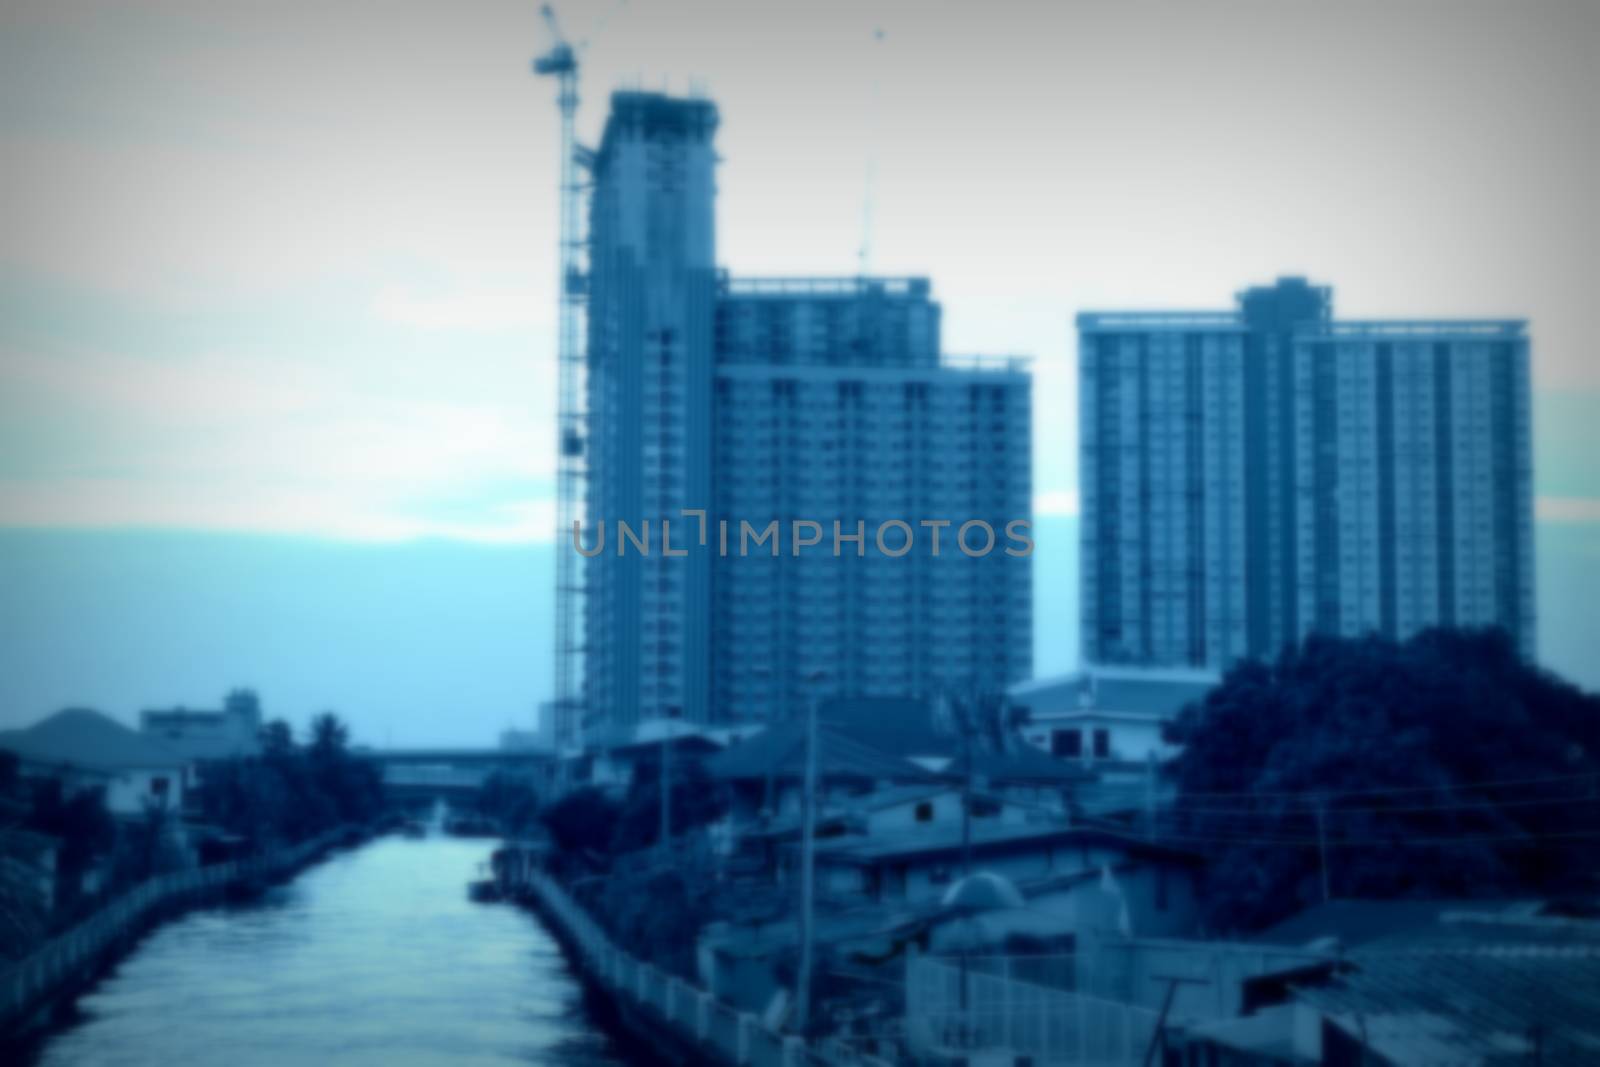 Blurred Scene of Pran Sricharoen Canal in Bangkok, Thailand with Blue Filter. by mesamong